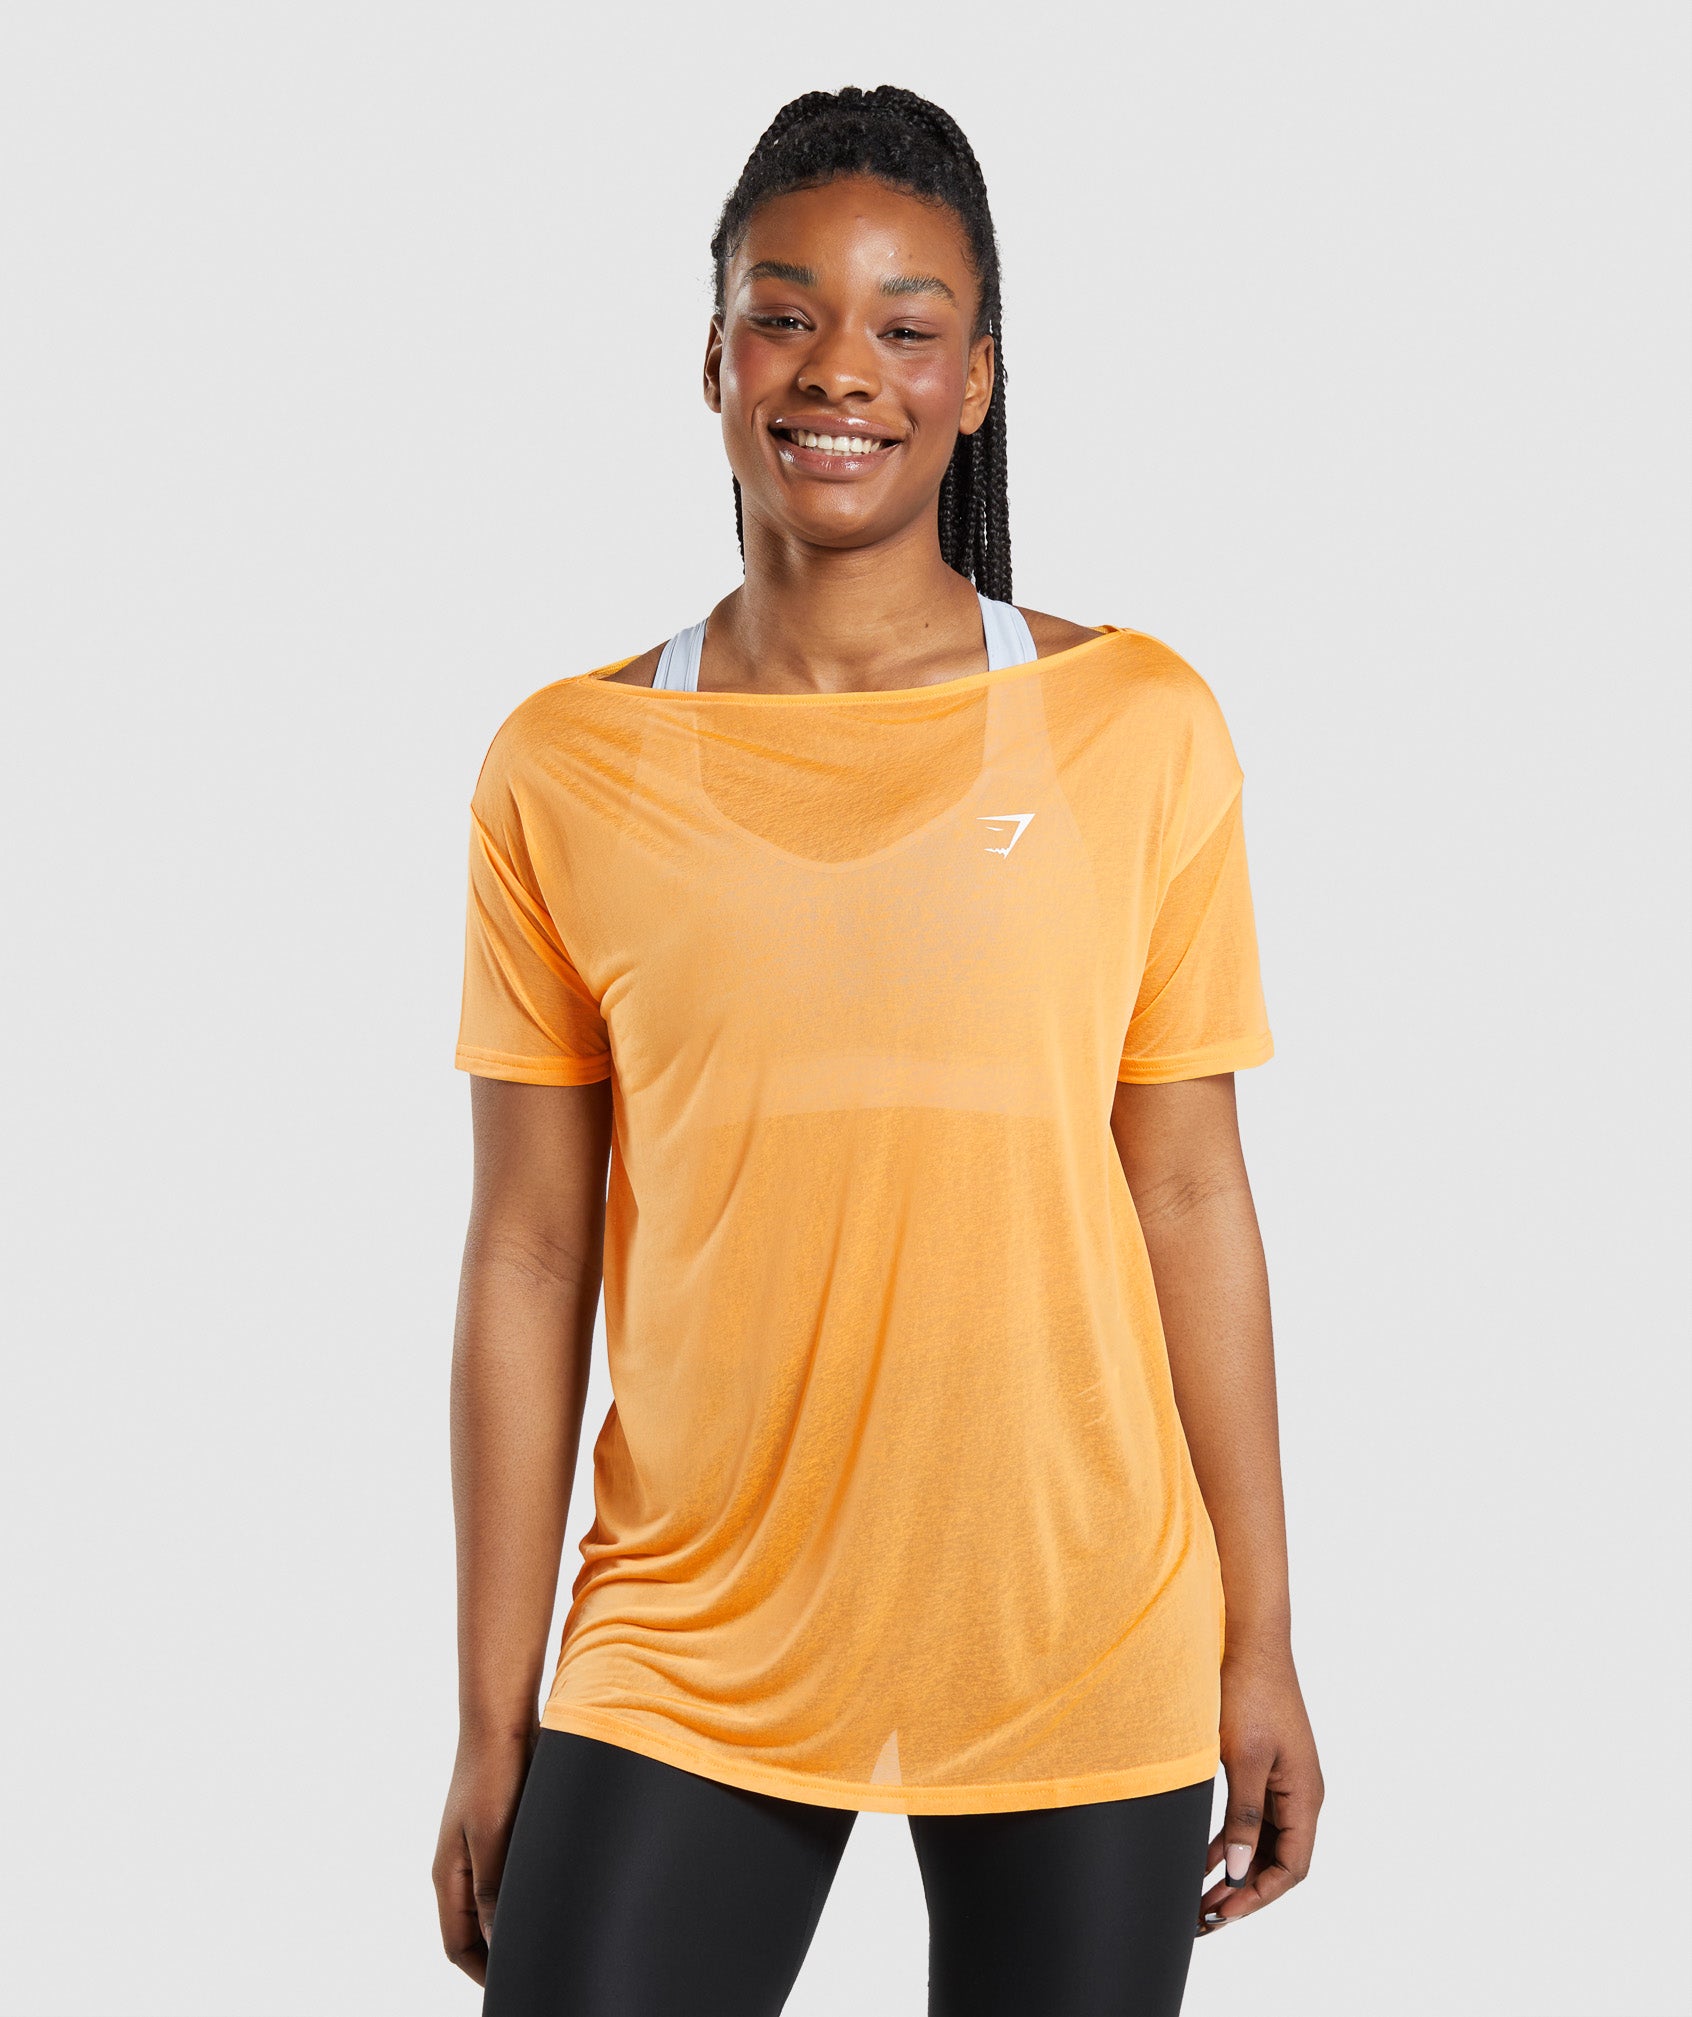 Training Oversized Top in Apricot Orange - view 1